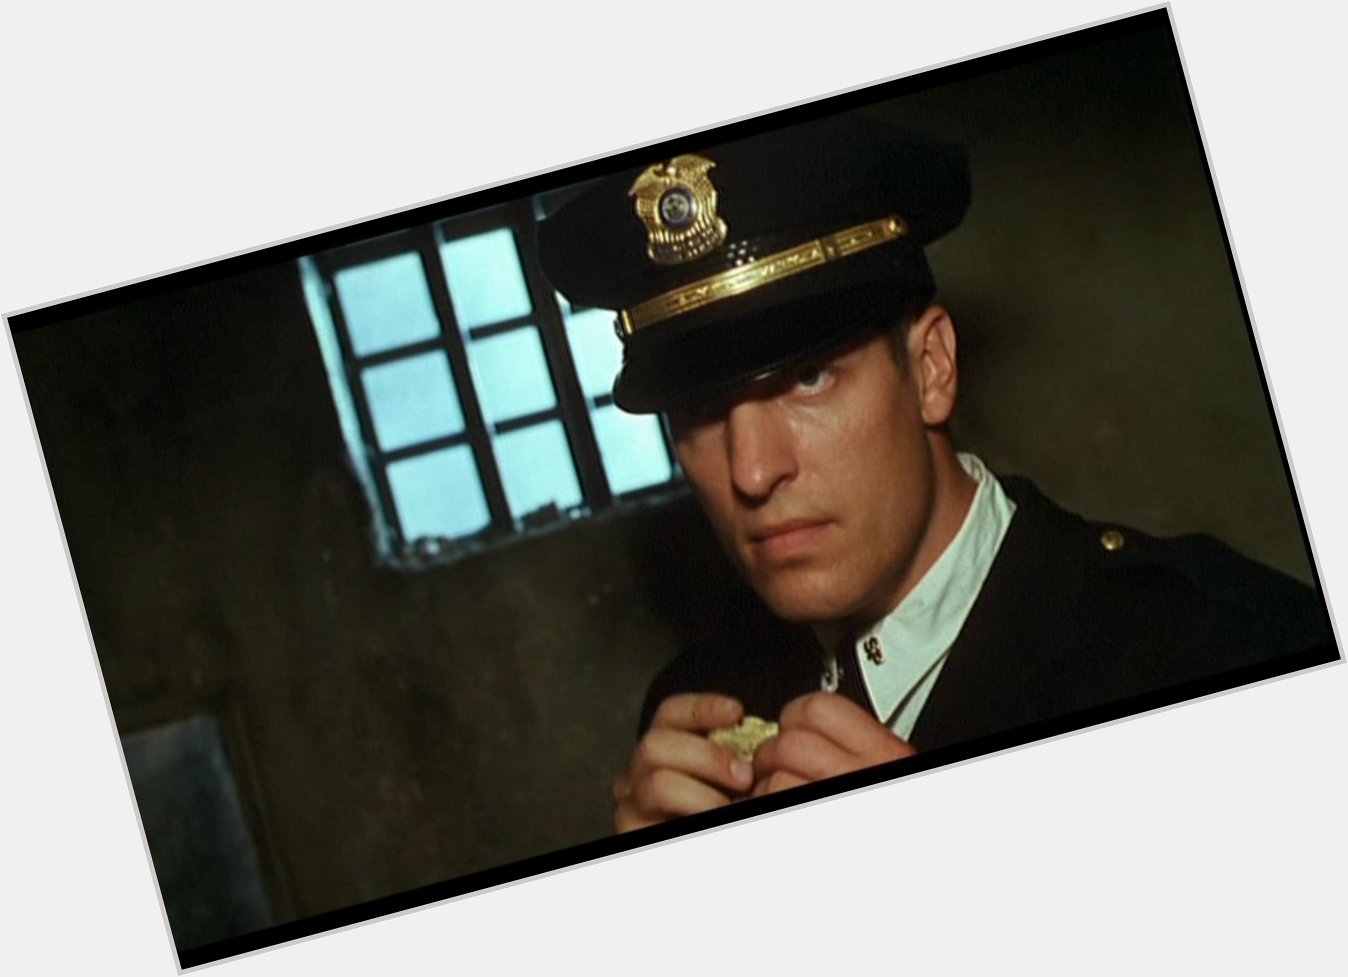 Happy Birthday to Clancy Brown, here in THE SHAWSHANK REDEMPTION! 